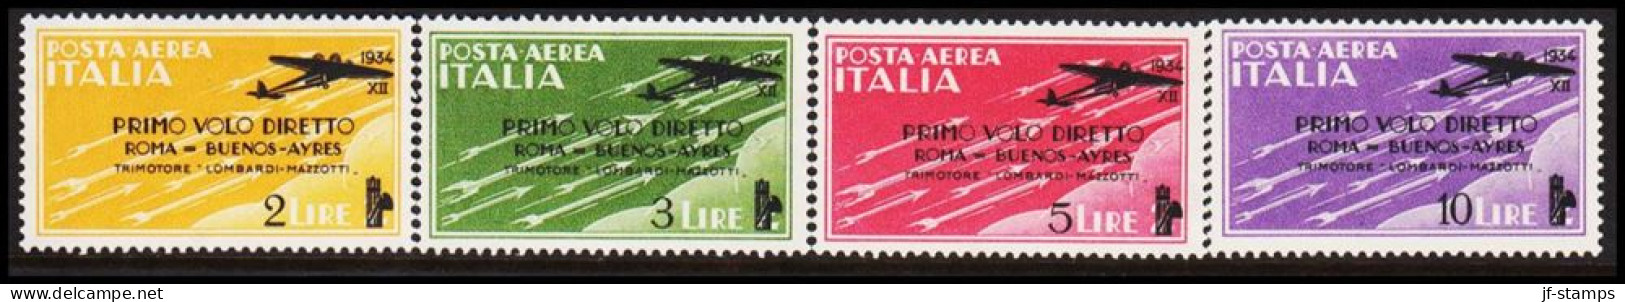 1934. ITALIANA. First Flight Rom-Buenos Aires. Complete Set With 4 Fine Stamps. No Gum. (Michel 459-462) - JF544900 - Nuovi